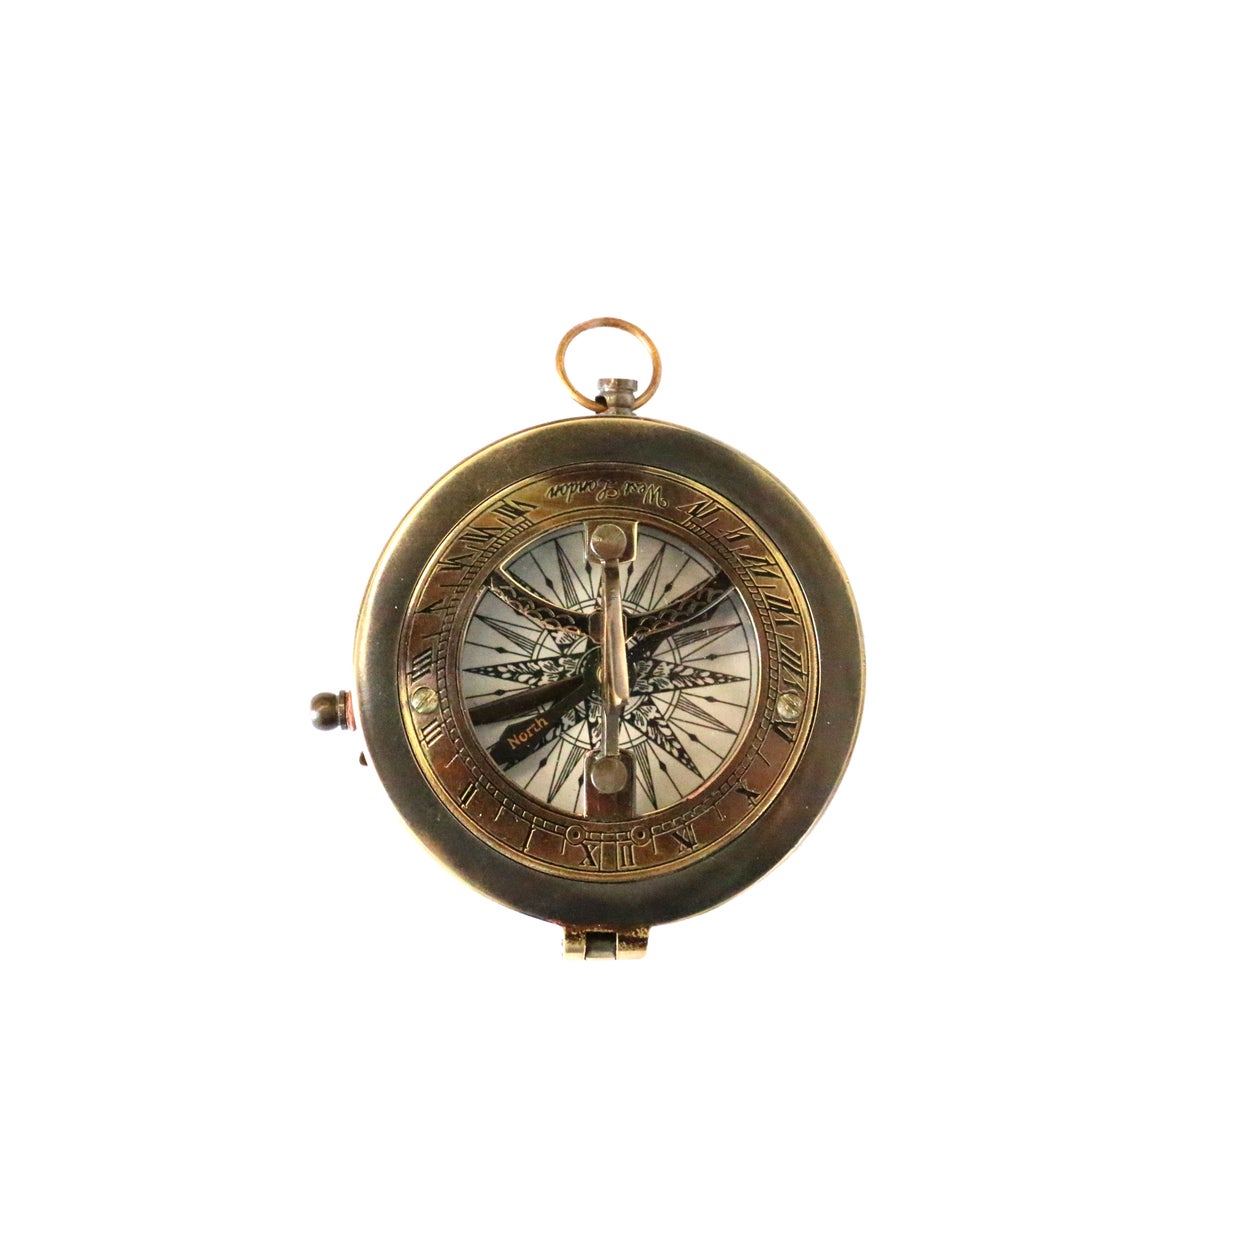 Sundial with Compass in Two Tone Antique Finish